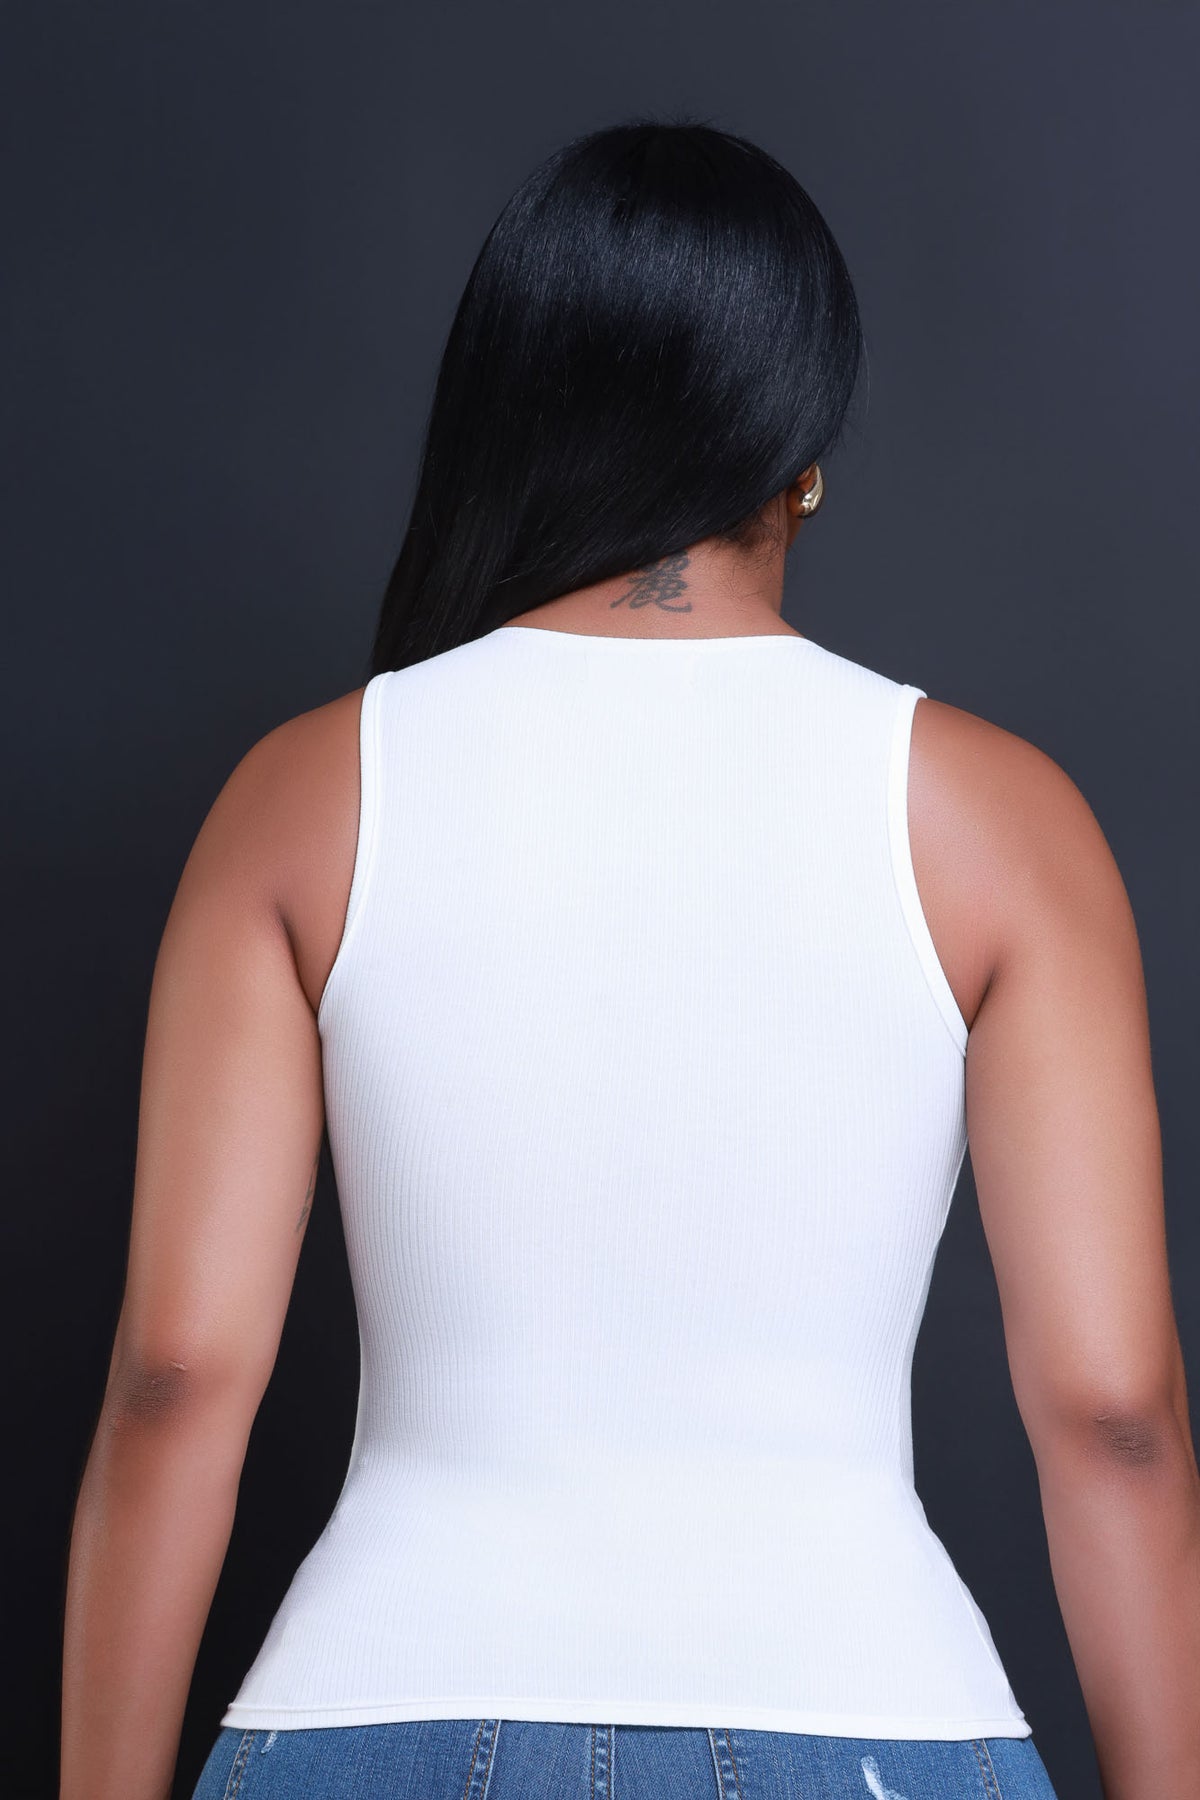 
              Top Of The Line Cellulite Deleter Sleeveless Ribbed Top - White - Swank A Posh
            